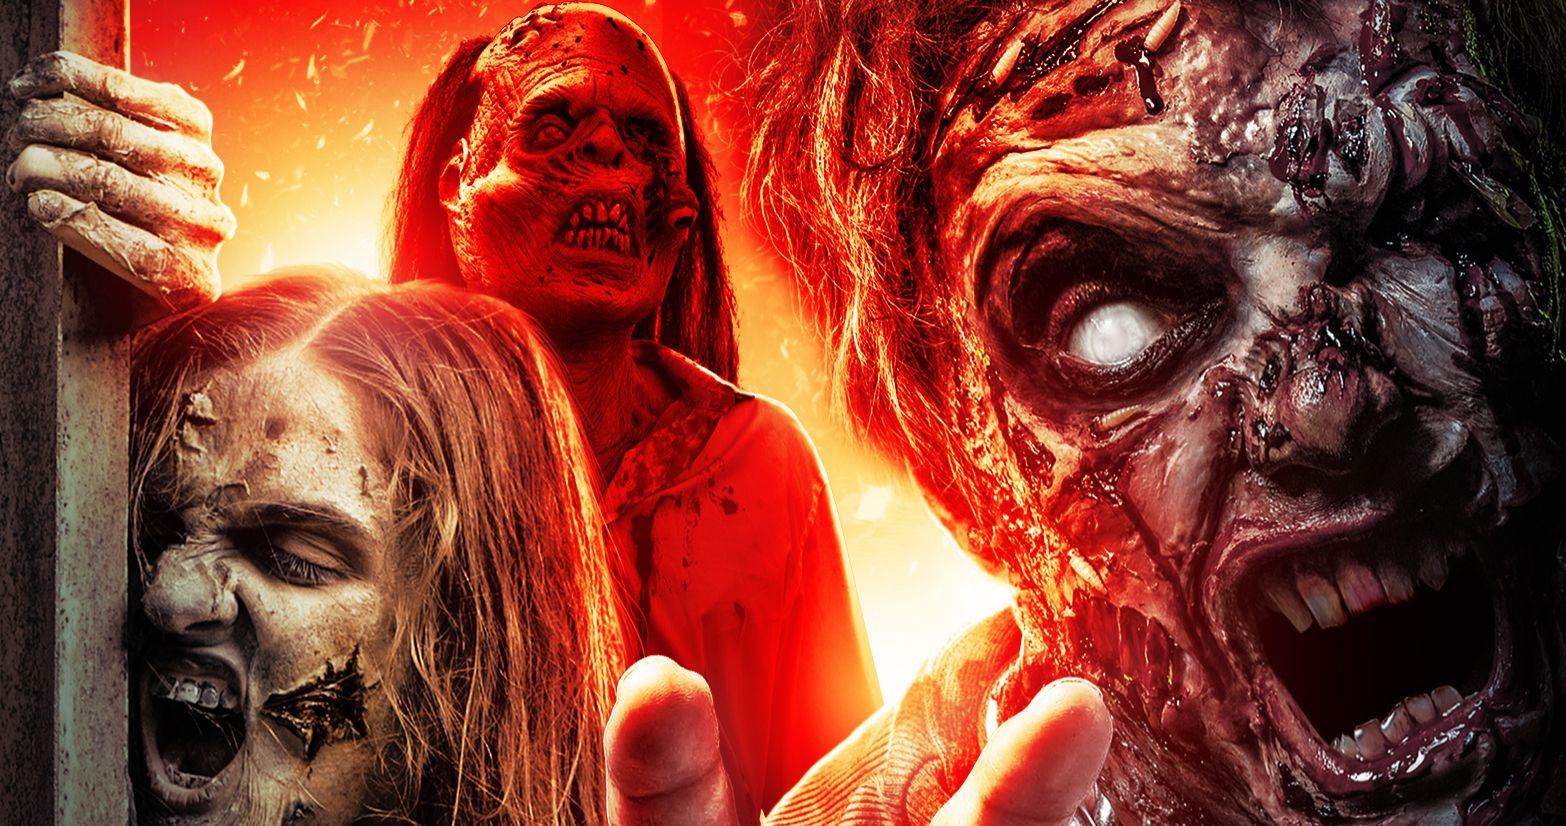 Berserkers Trailer Unleashes Zombie Madness in a Post-Apocalyptic Wasteland